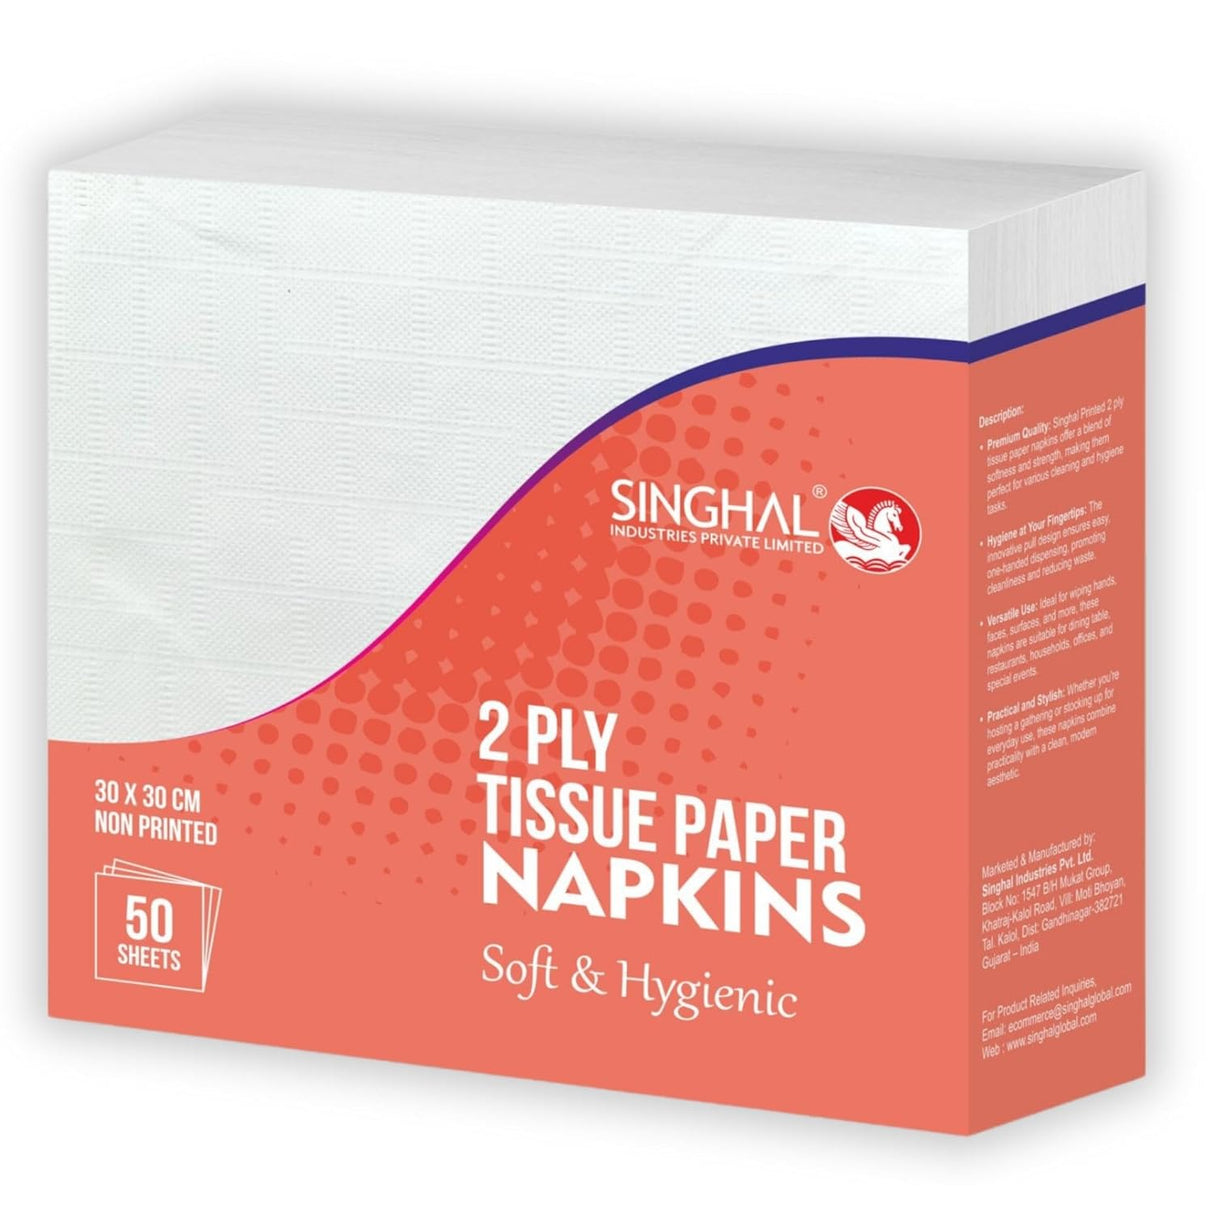 Singhal 2 Ply Tissue Paper Napkins Plain 30x30 CM - Pack of 6 (50 Pulls Per Pack, 300 Sheets)